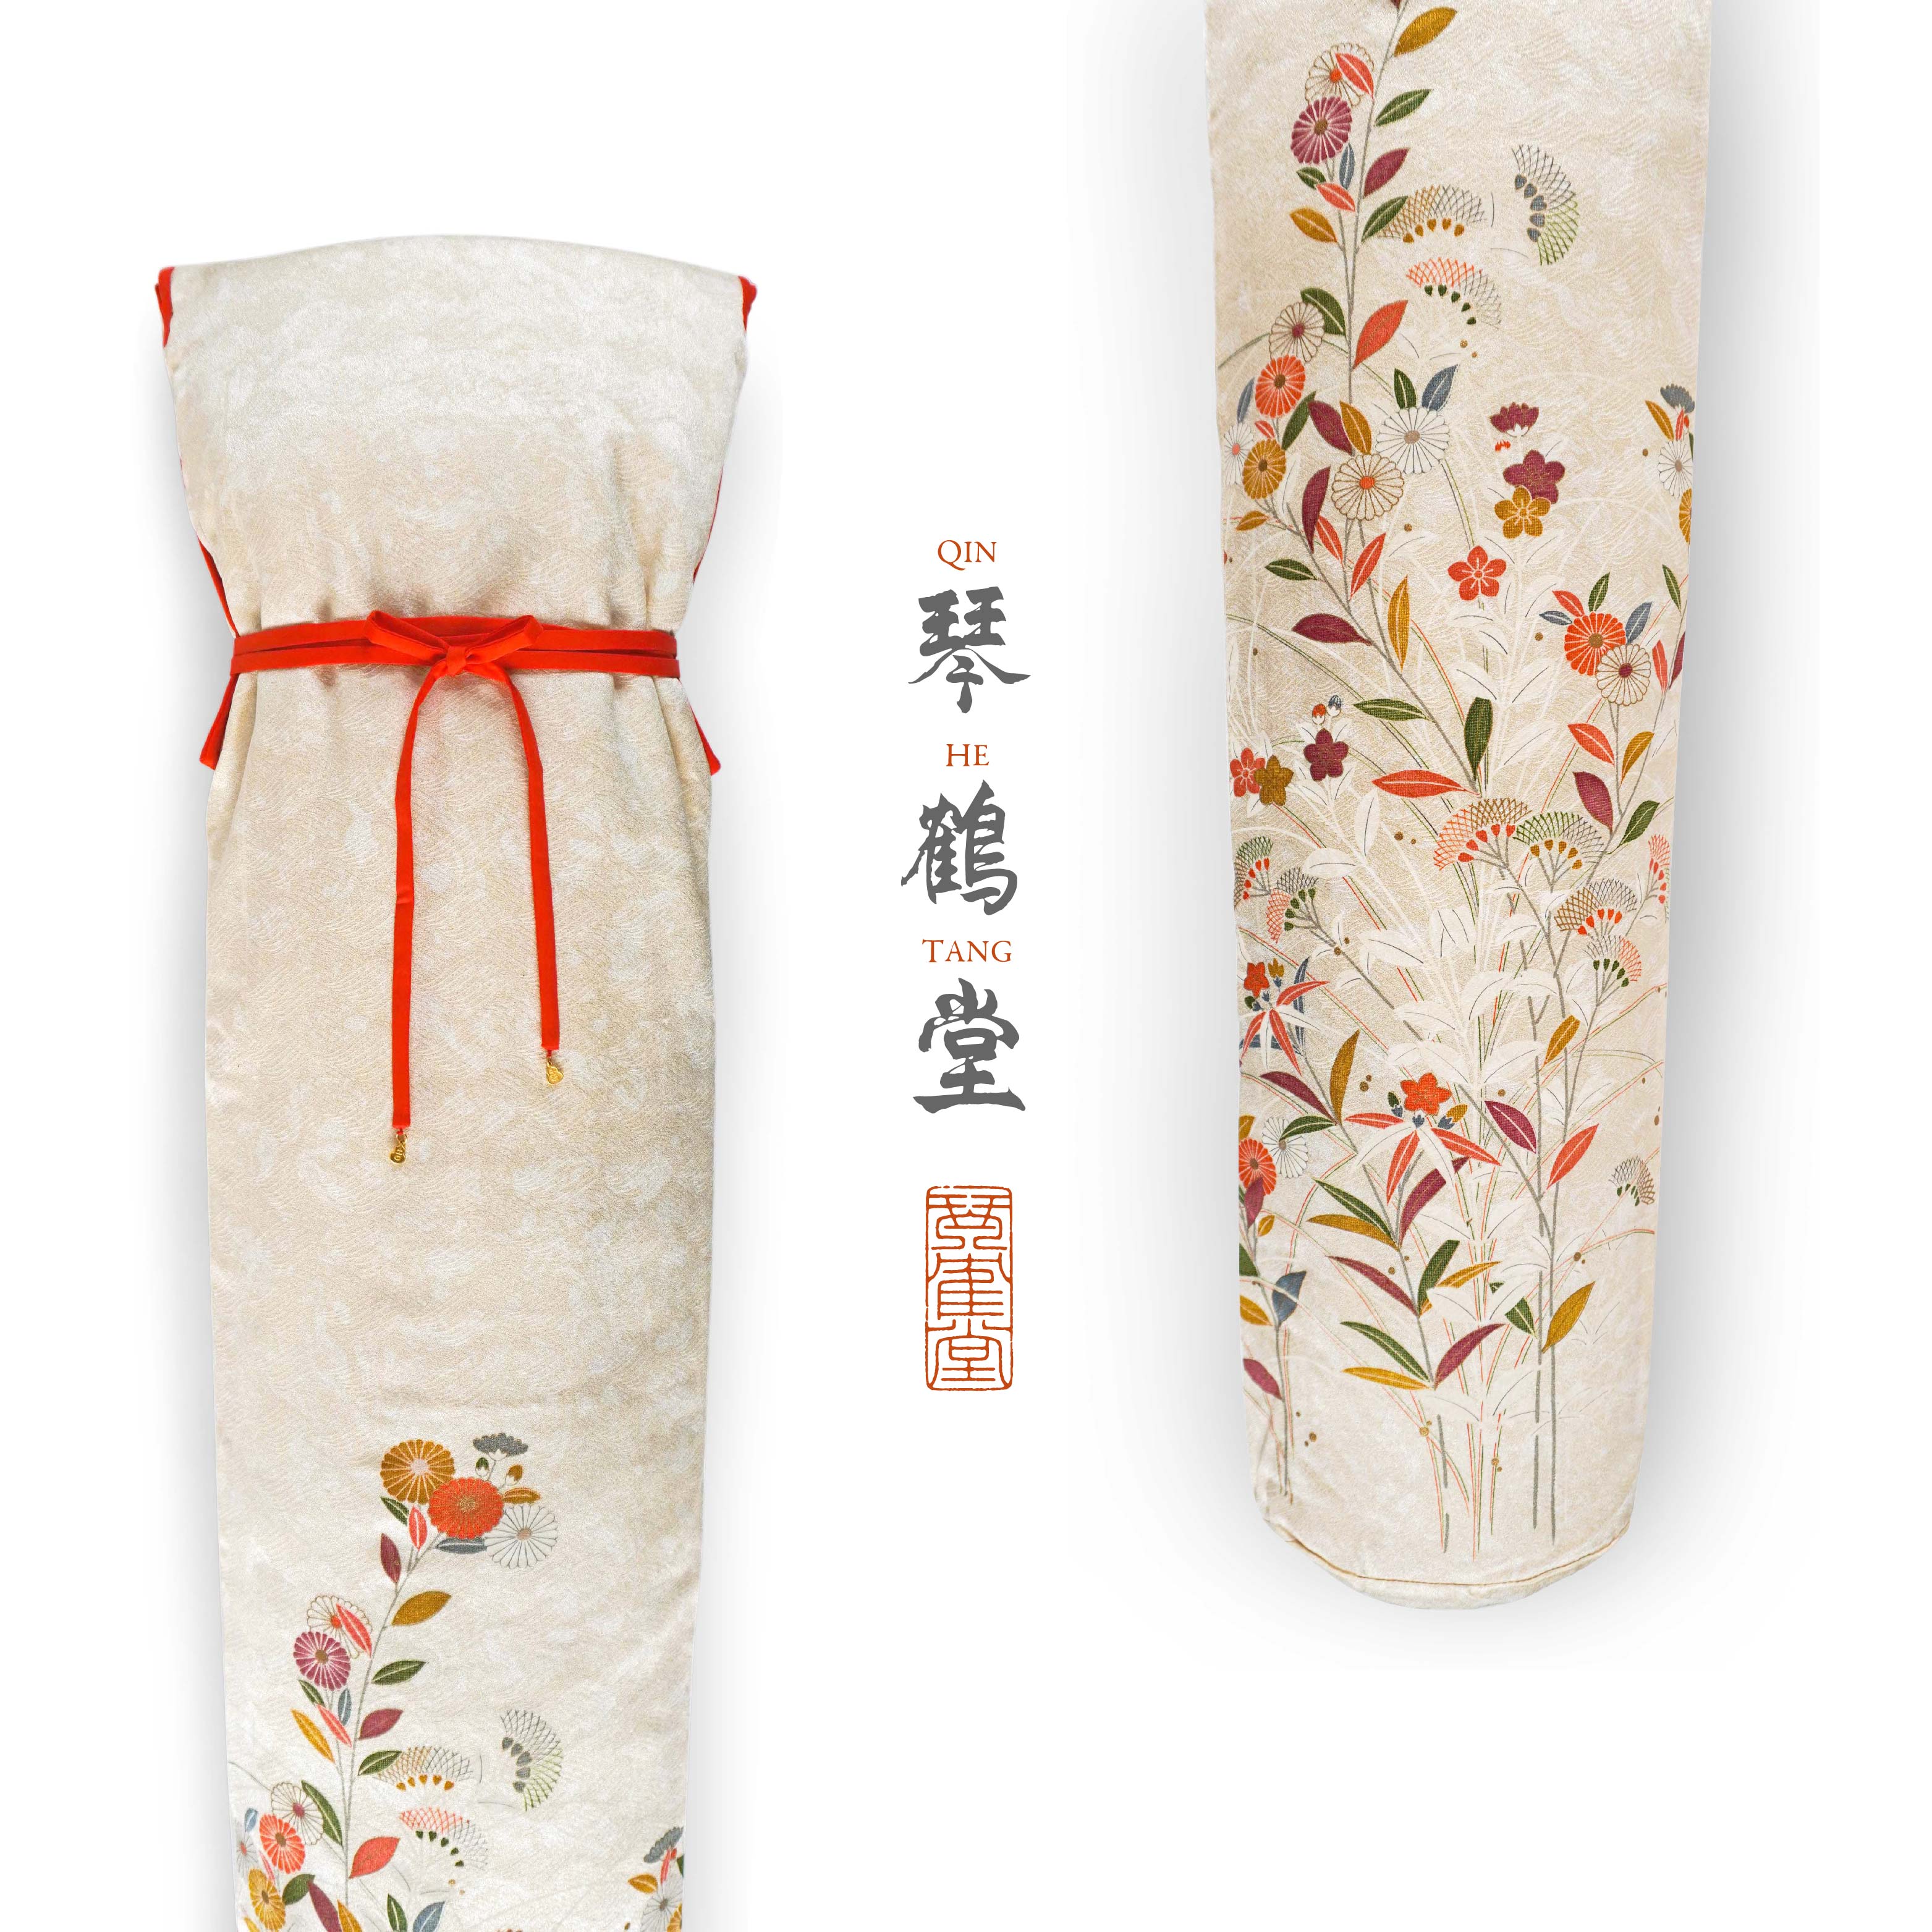 Fragrant Bloom" - Exquisite Vintage Silk Fabric Guqin Cover Set: Traditional Chinese Musical Instrument Attire Handcrafted Masterpiece